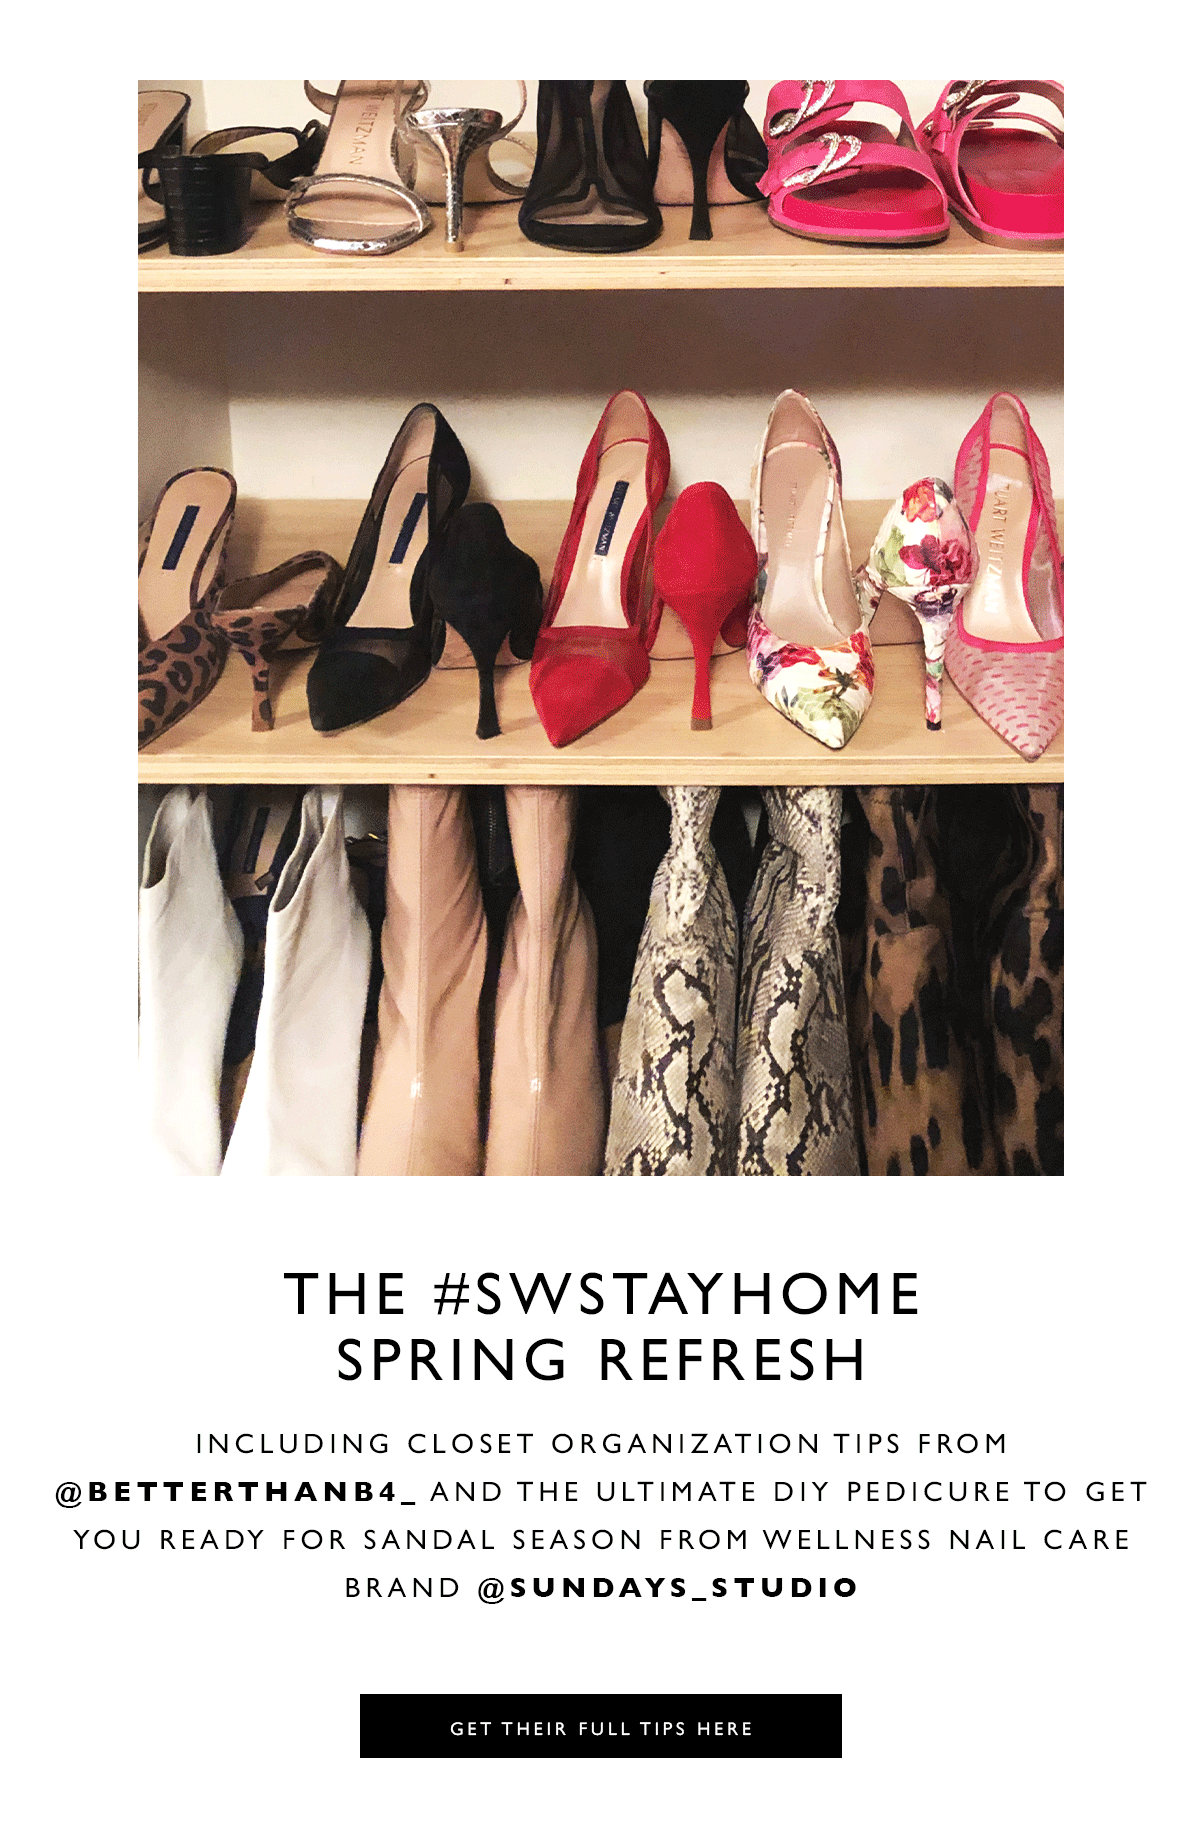 The #SWStayHome Spring Refresh. Including closet organization tips from @betterthanbefore and the ultimate DIY pedicure to get you ready for sandal season from wellness nail care brand @Sundays_Studio. GET THEIR FULL TIPS HERE